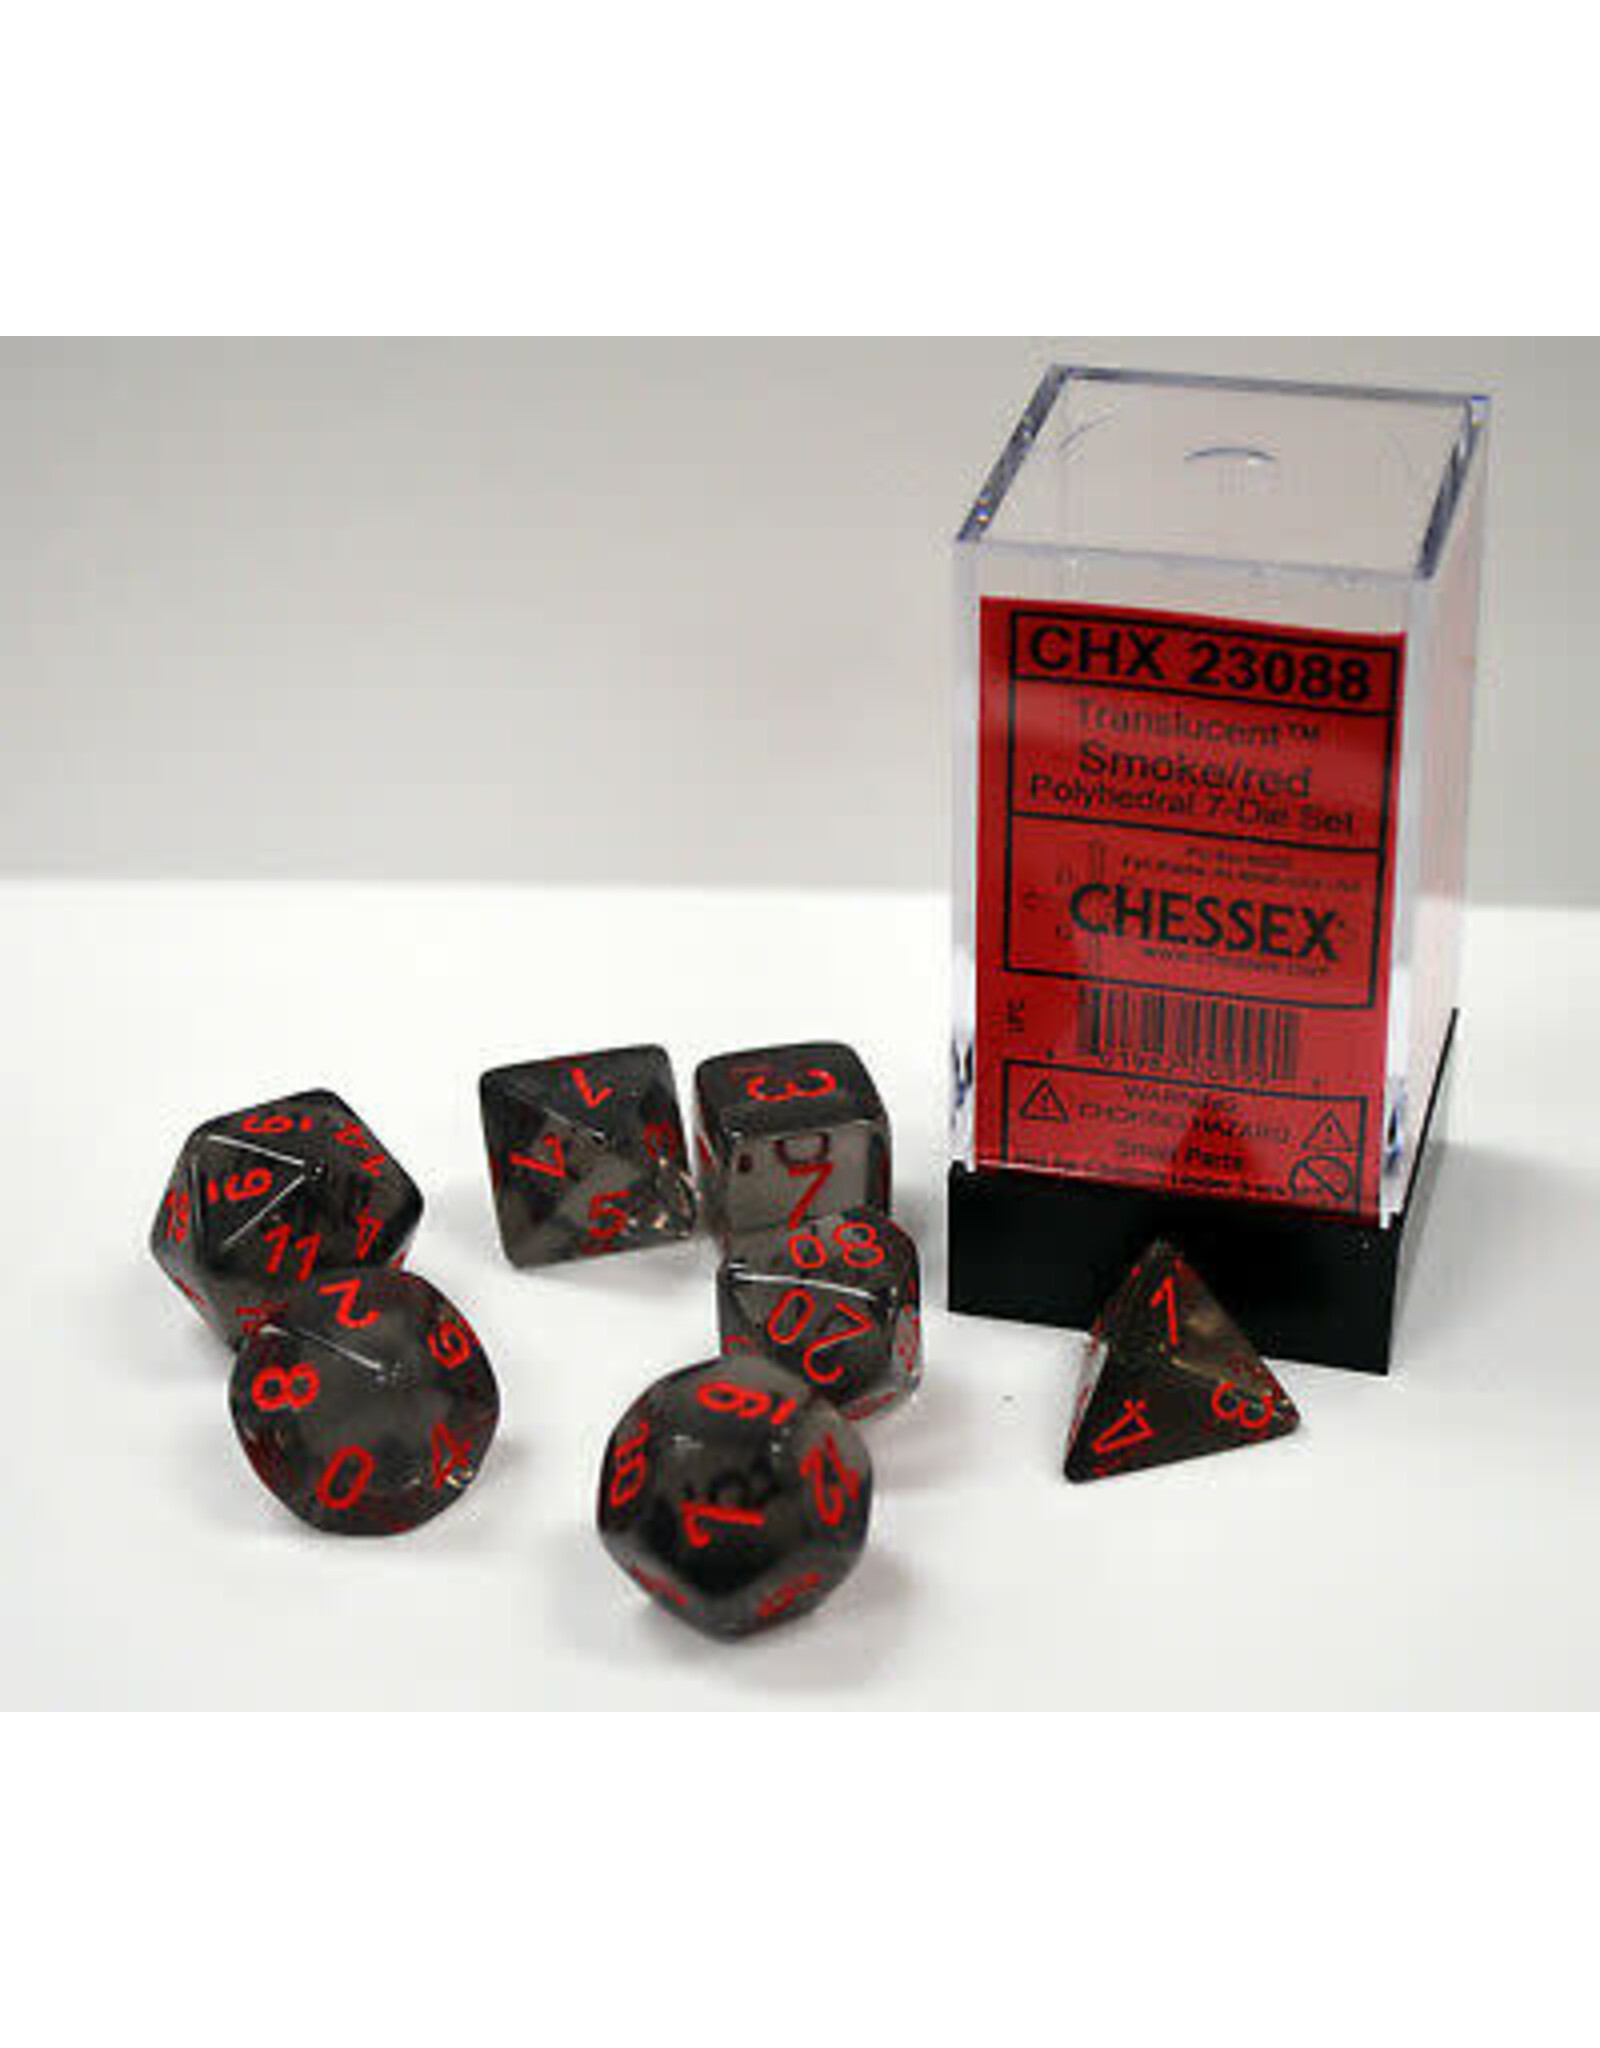 Chessex Smoke/ red Translucent Poly 7 dice set